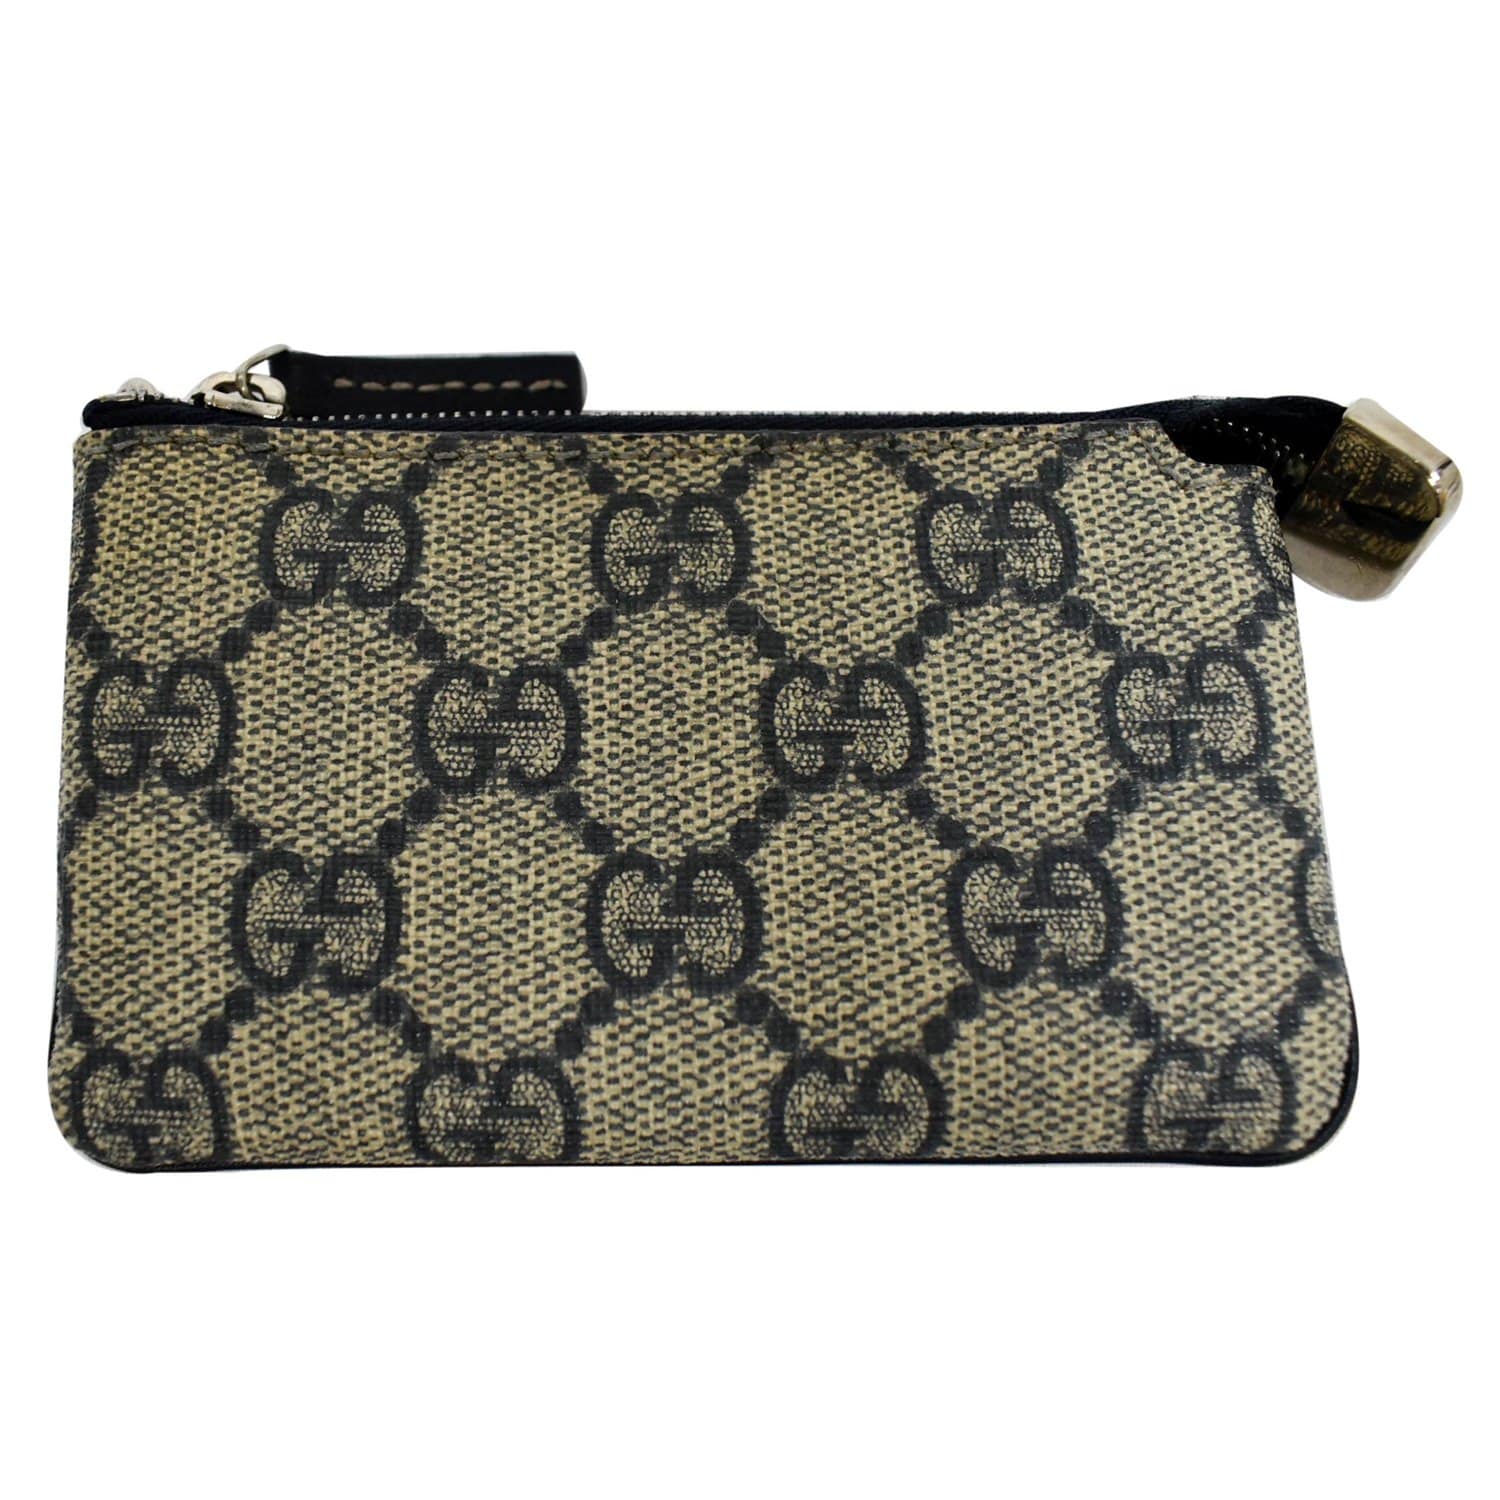 Gucci, Accessories, Authentic Gucci Ophidia Gg Key Pouch